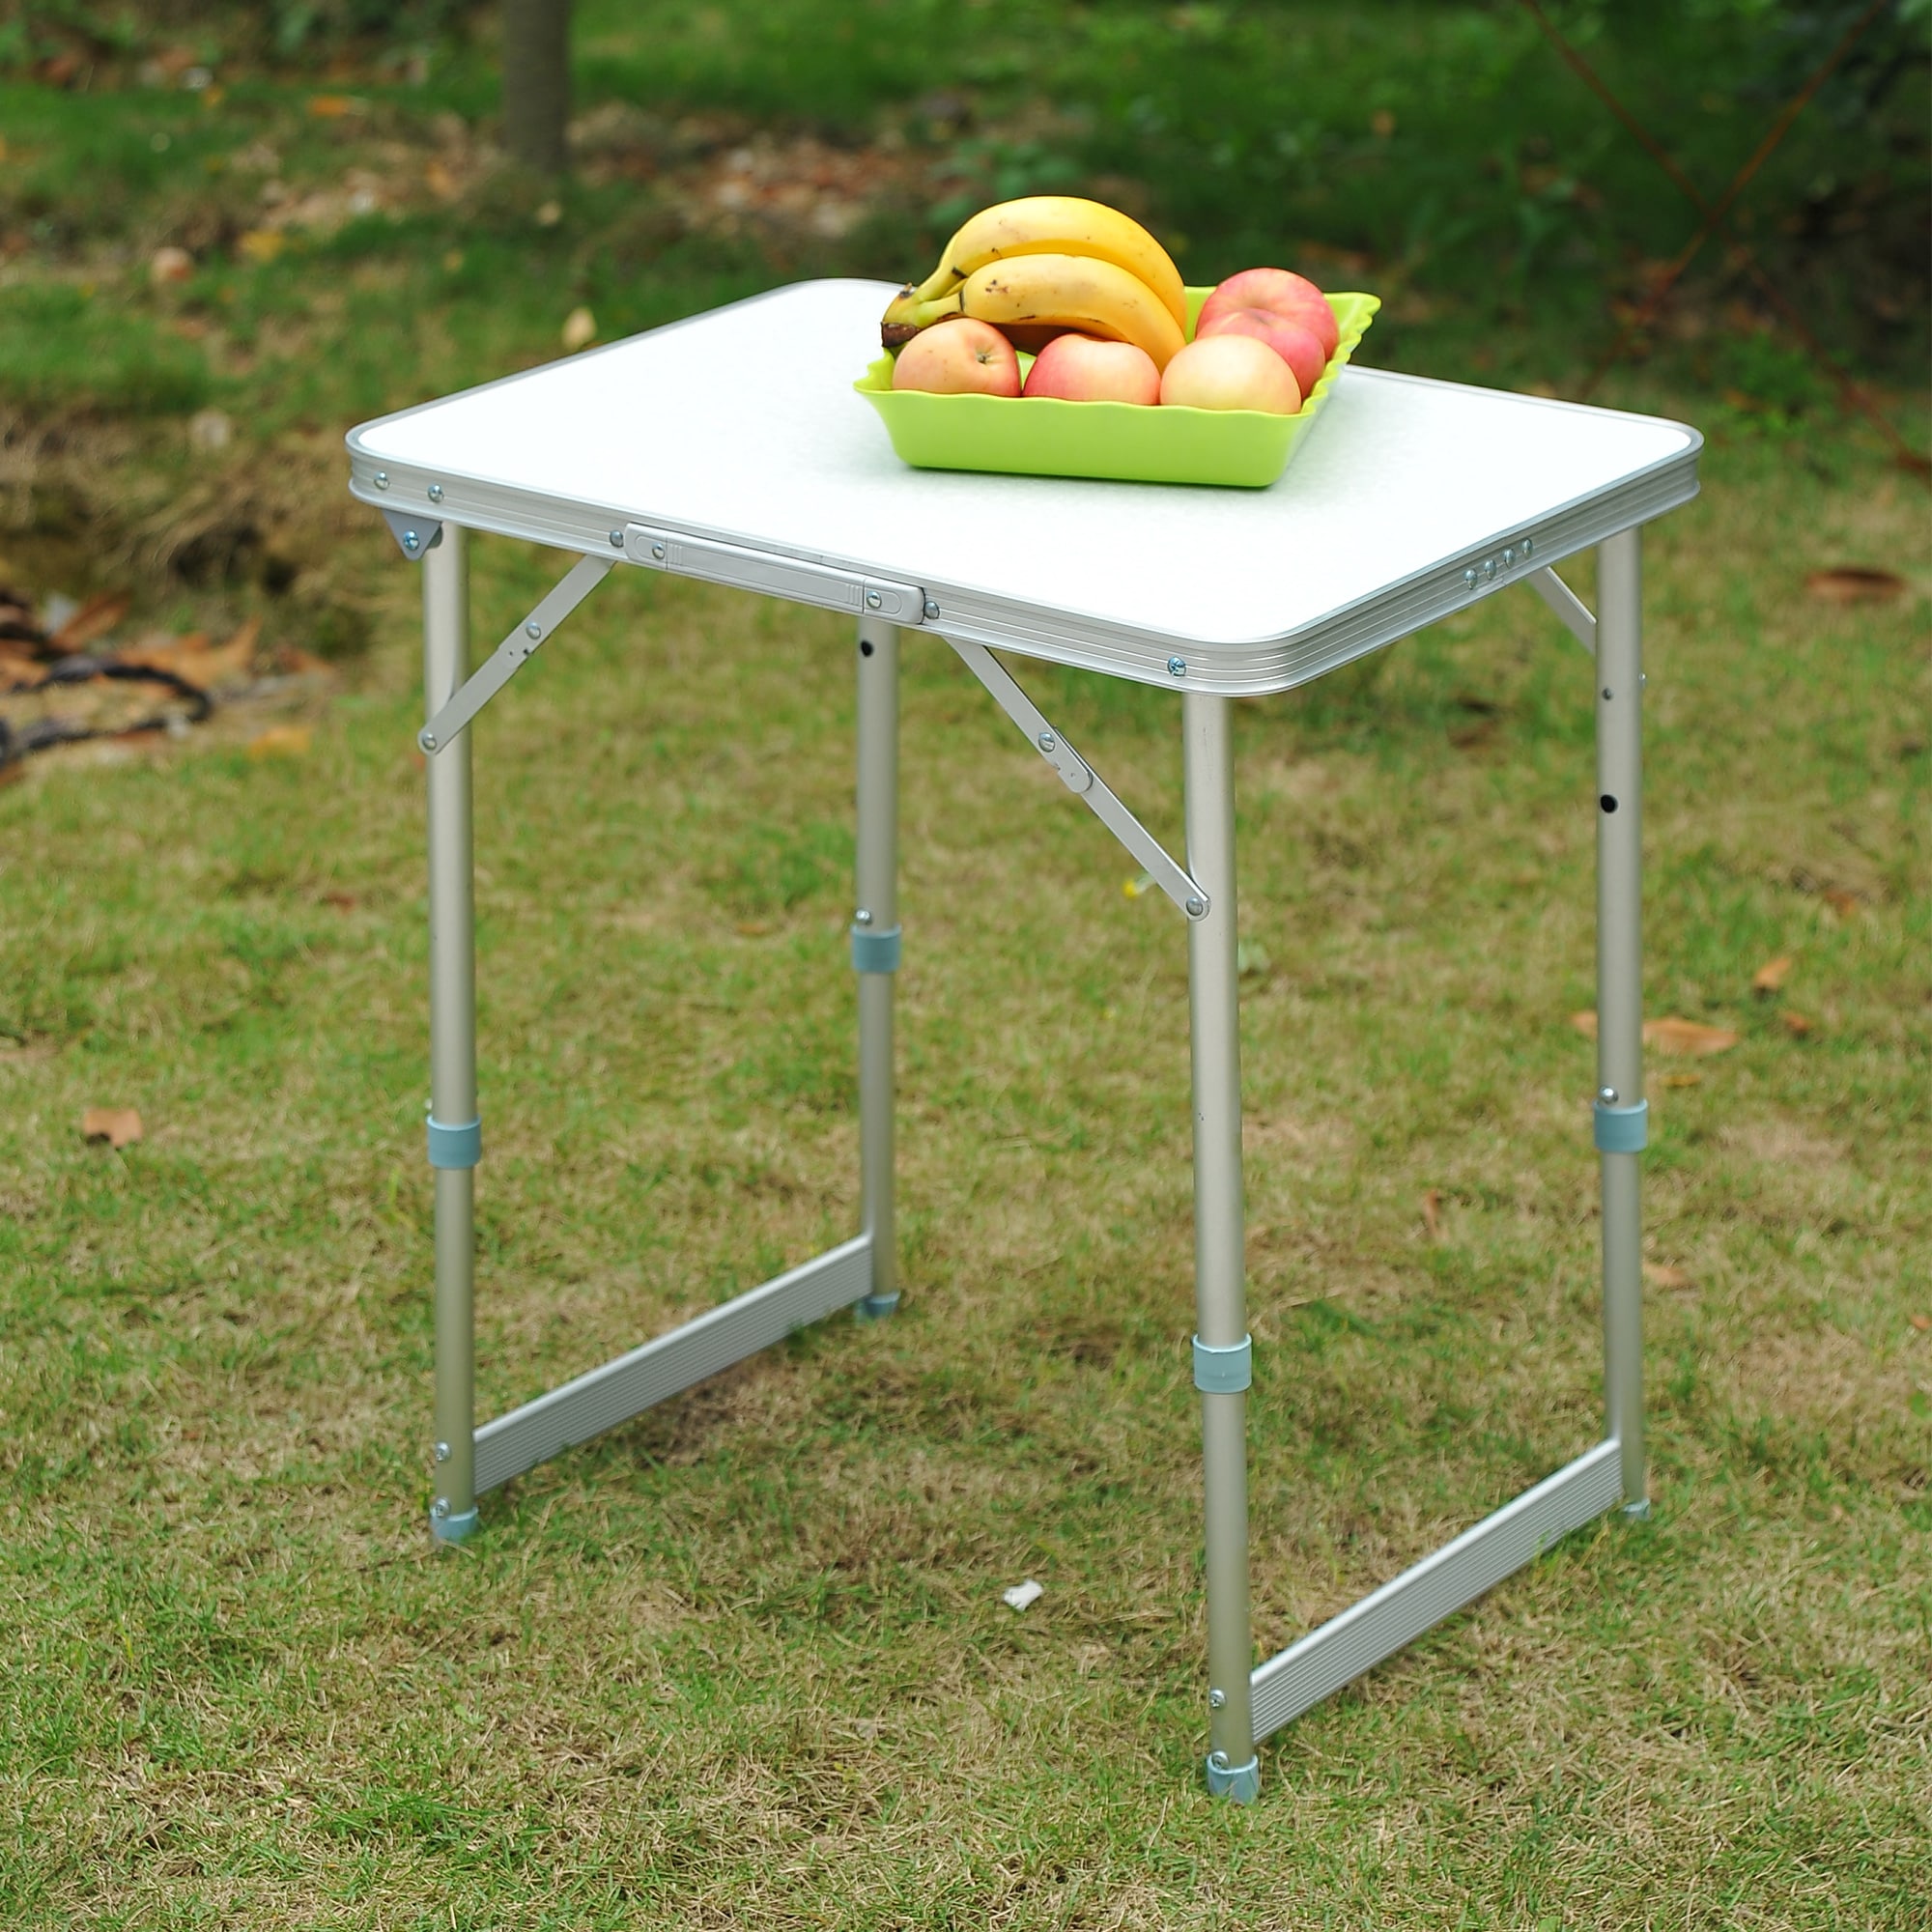 2FT Folding Portable Camping Picnic BBQ Lightweight Small Dining Table Plastic